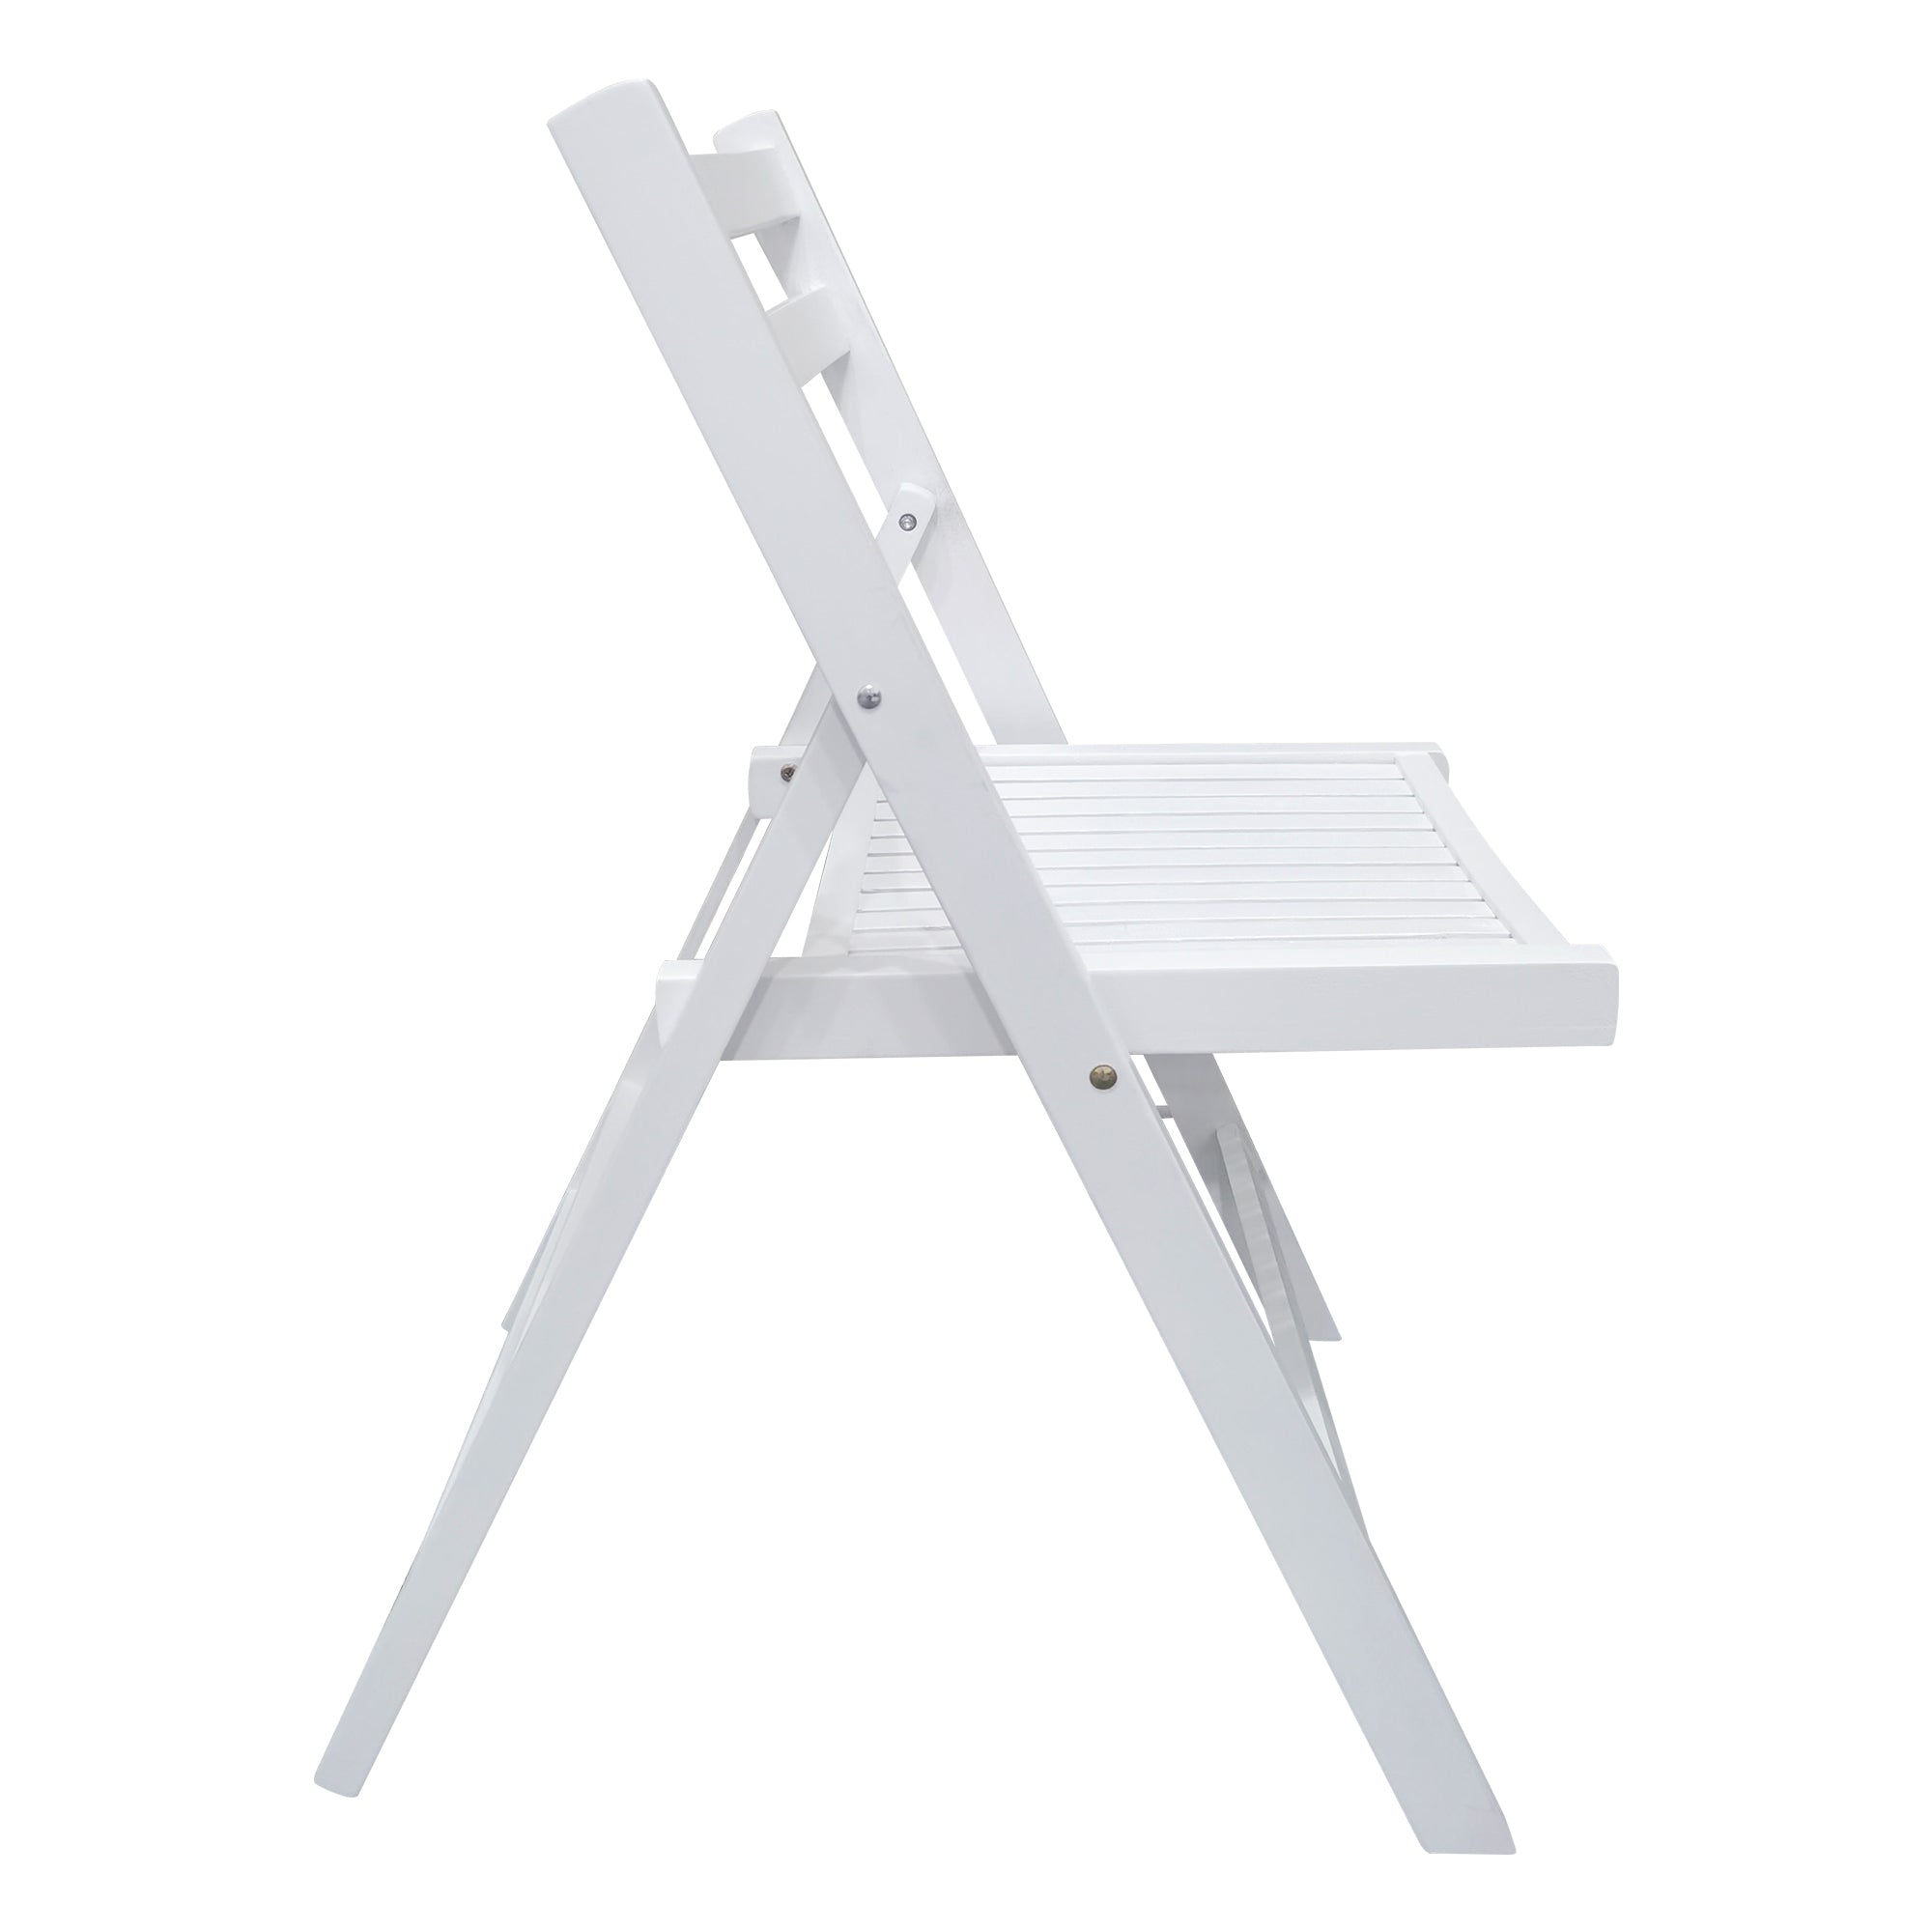 ZNTS Furniture Slatted Wood Folding Special Event Chair - White, Set of 4, FOLDING CHAIR, FOLDABLE STYLE W49532961